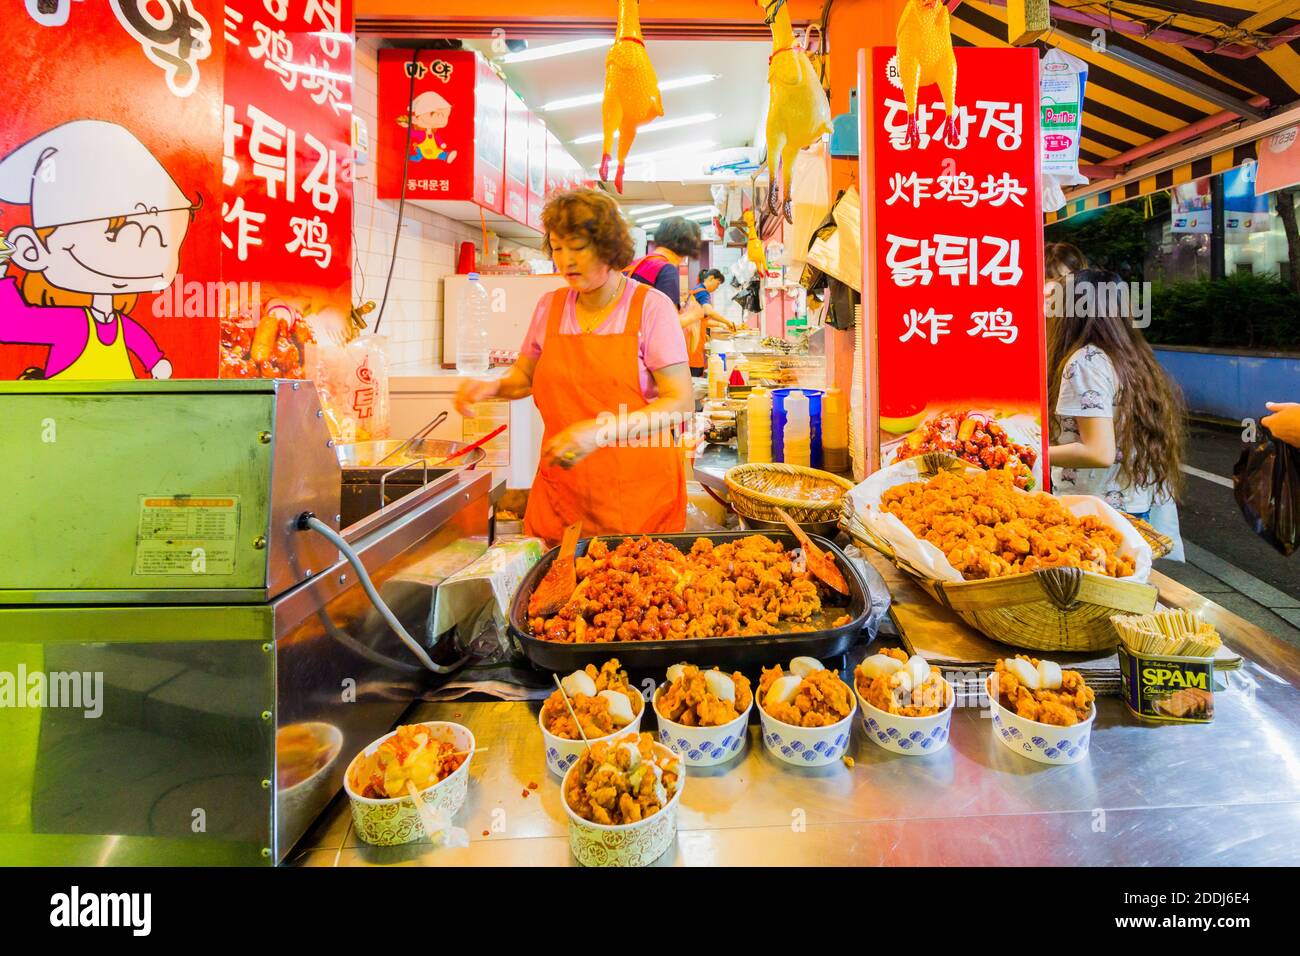 A street food stall at a night market in Seoul, South Korea Stock Photo